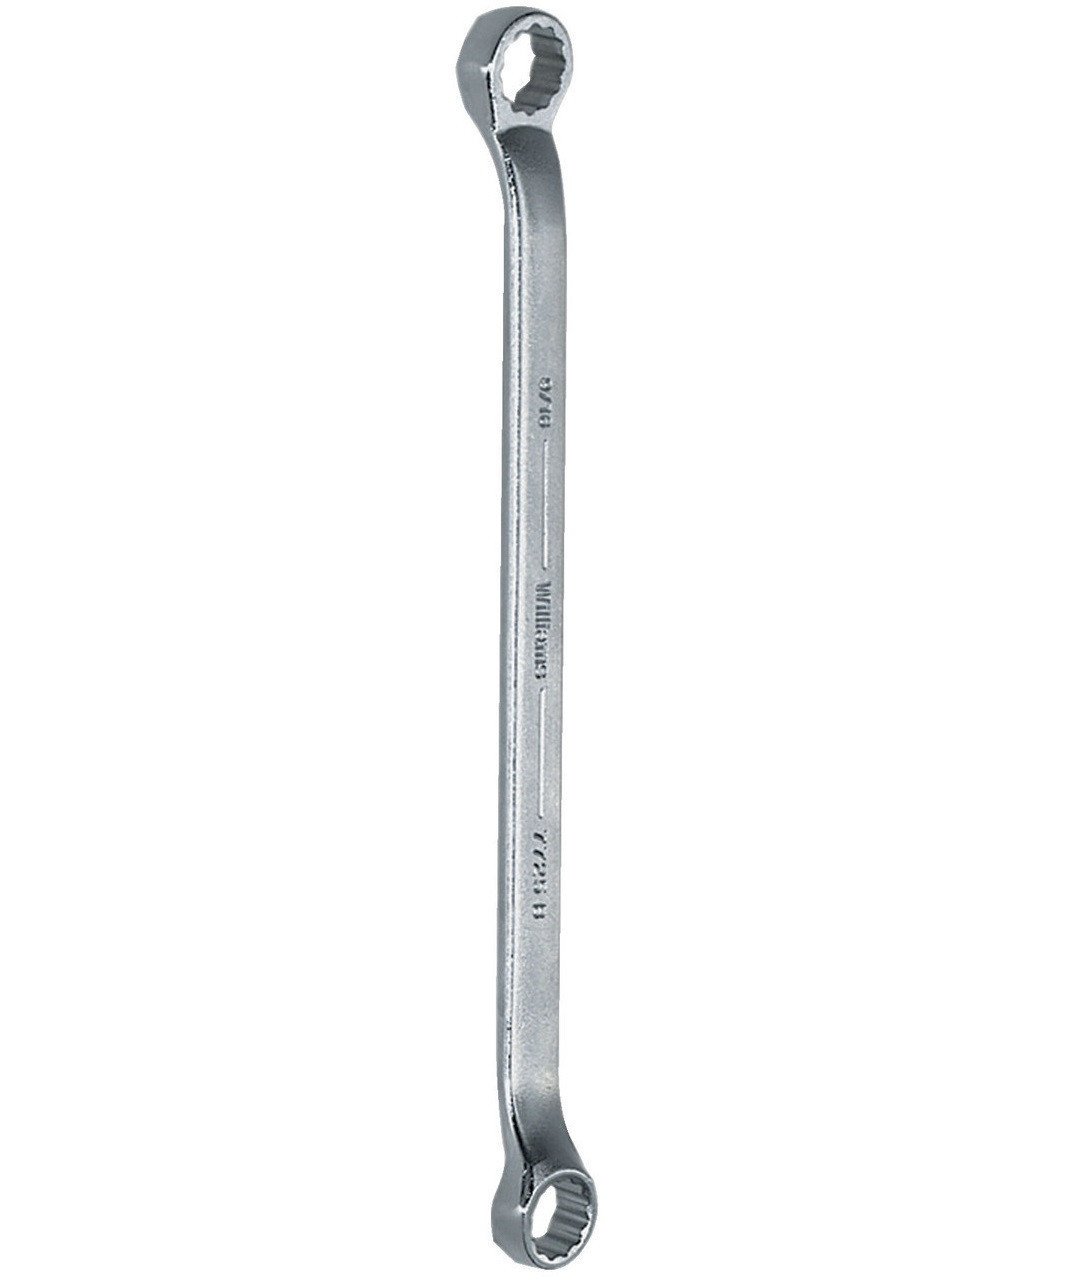 13x15MM Williams Satin Chrome Double Head 10 Degree Offset Box End Wrench 12 PT - JHWBWM-1315